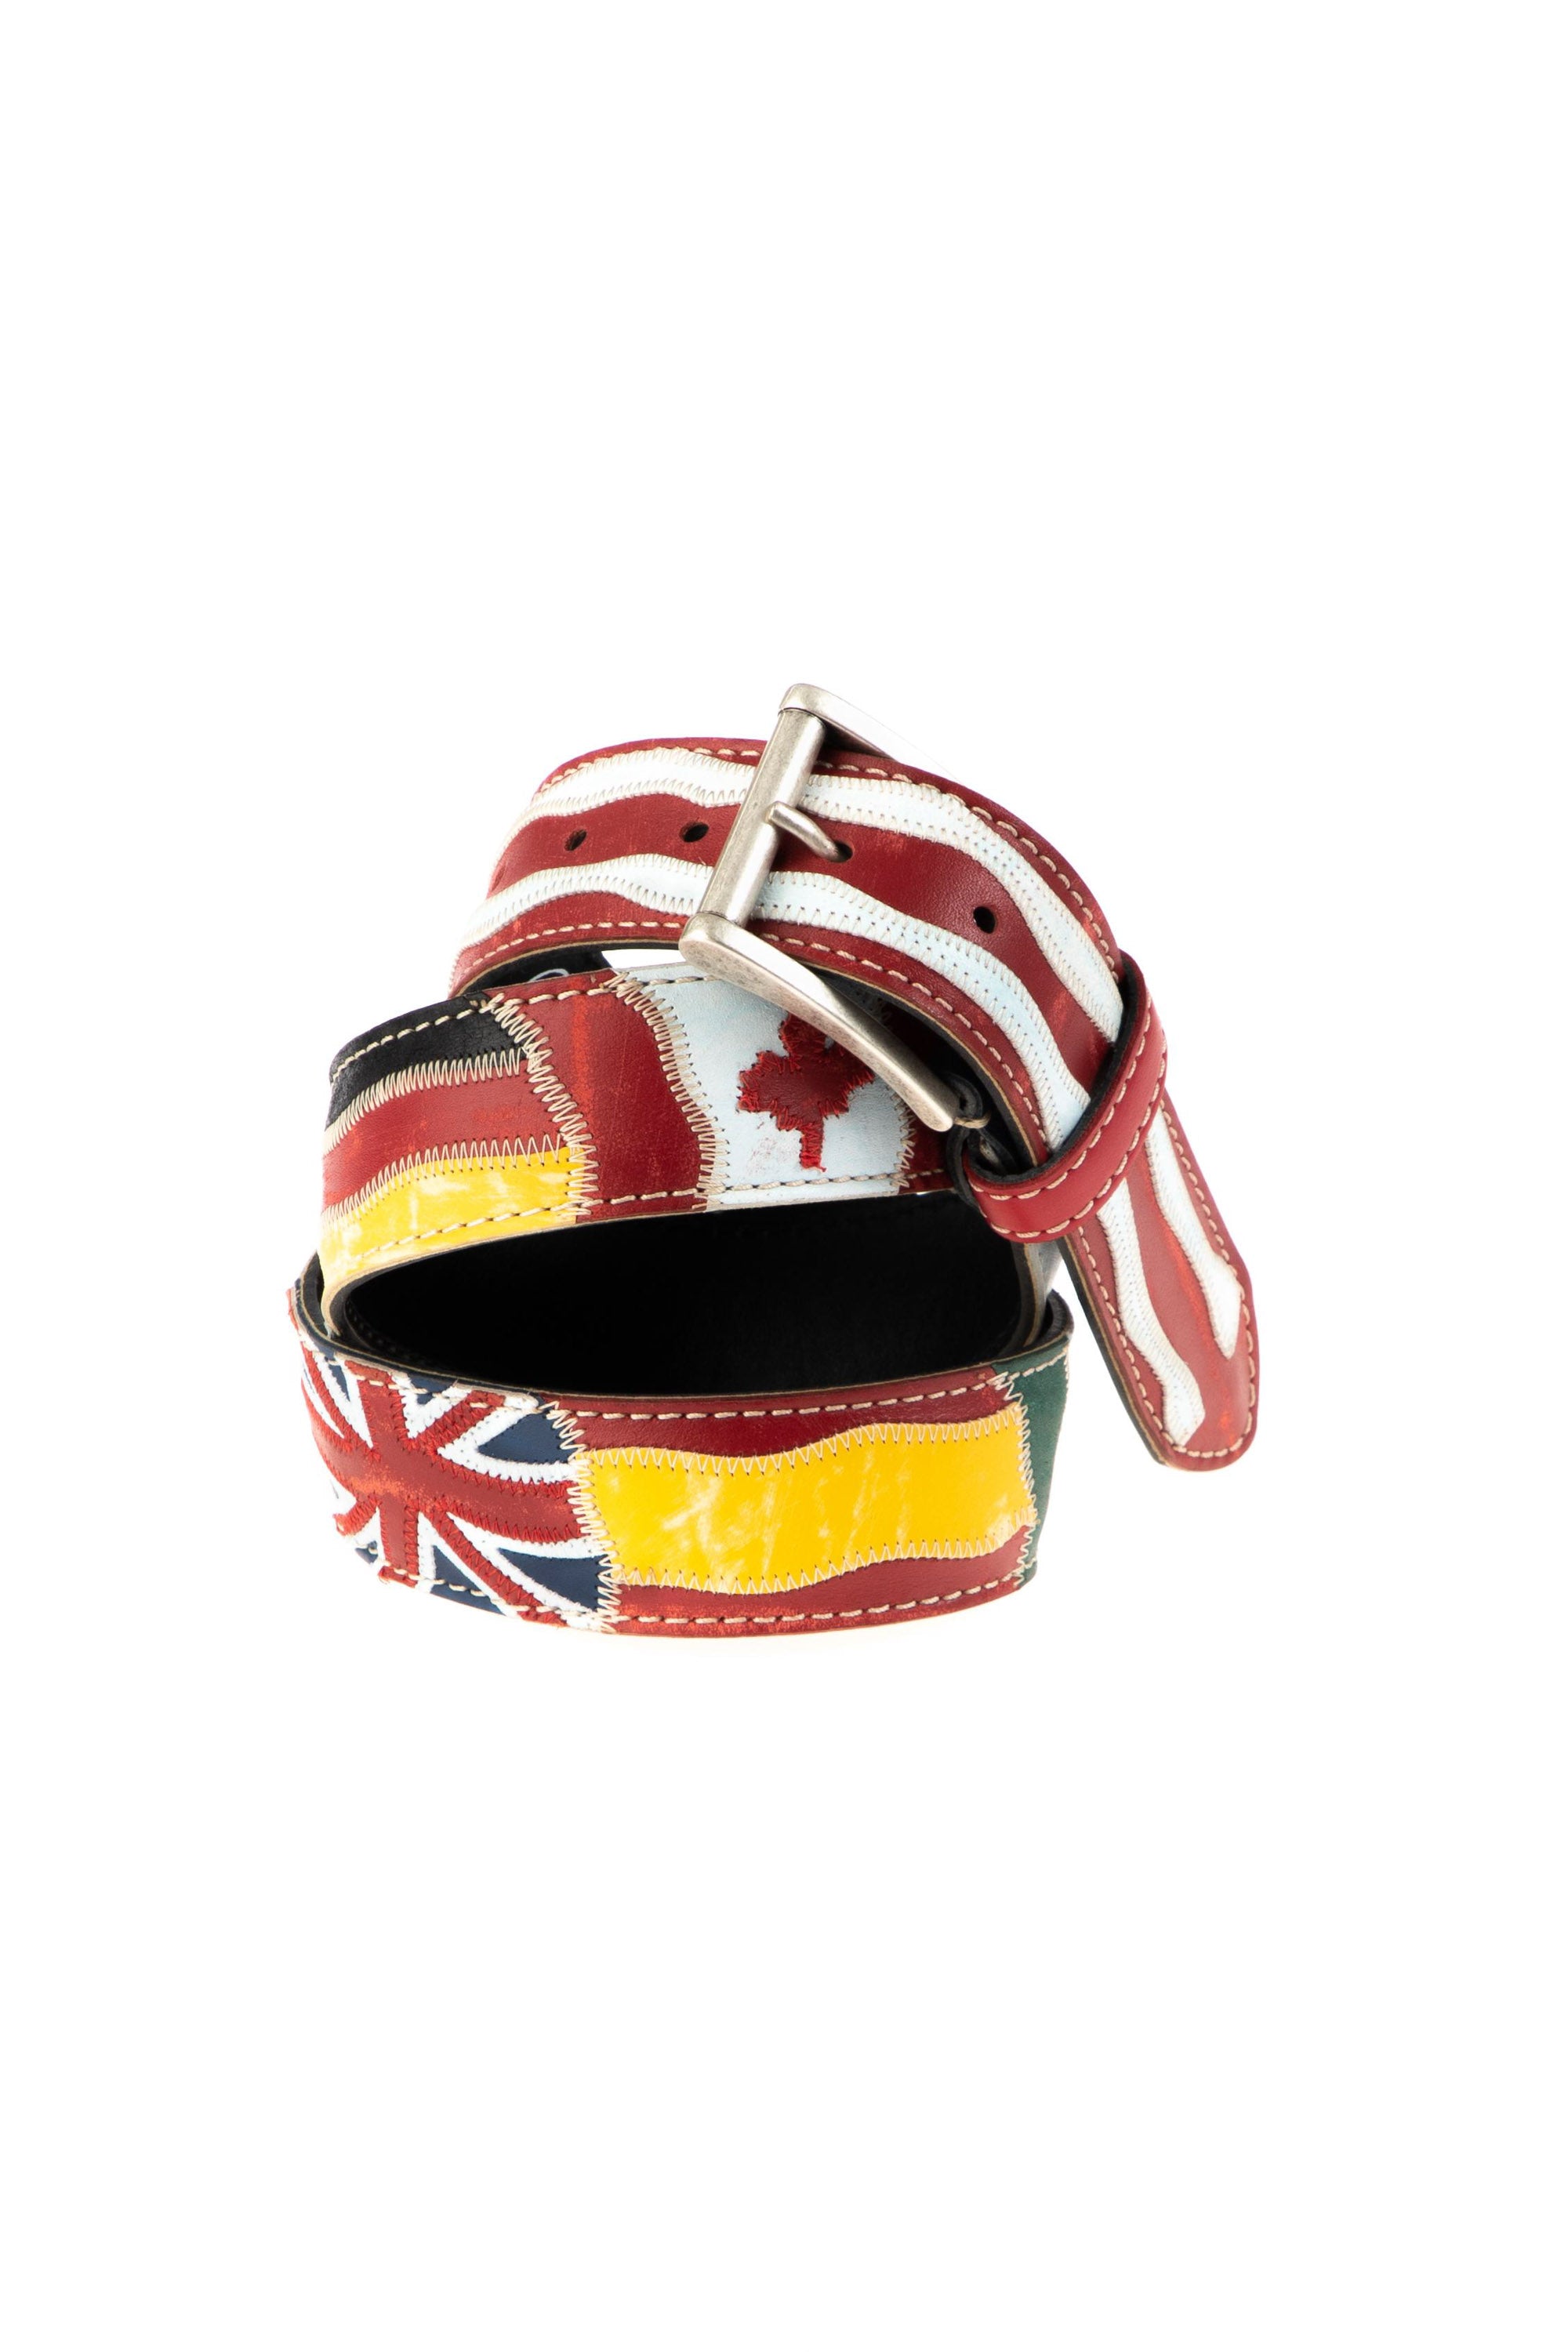 Handcrafted leather belt with flags of the world